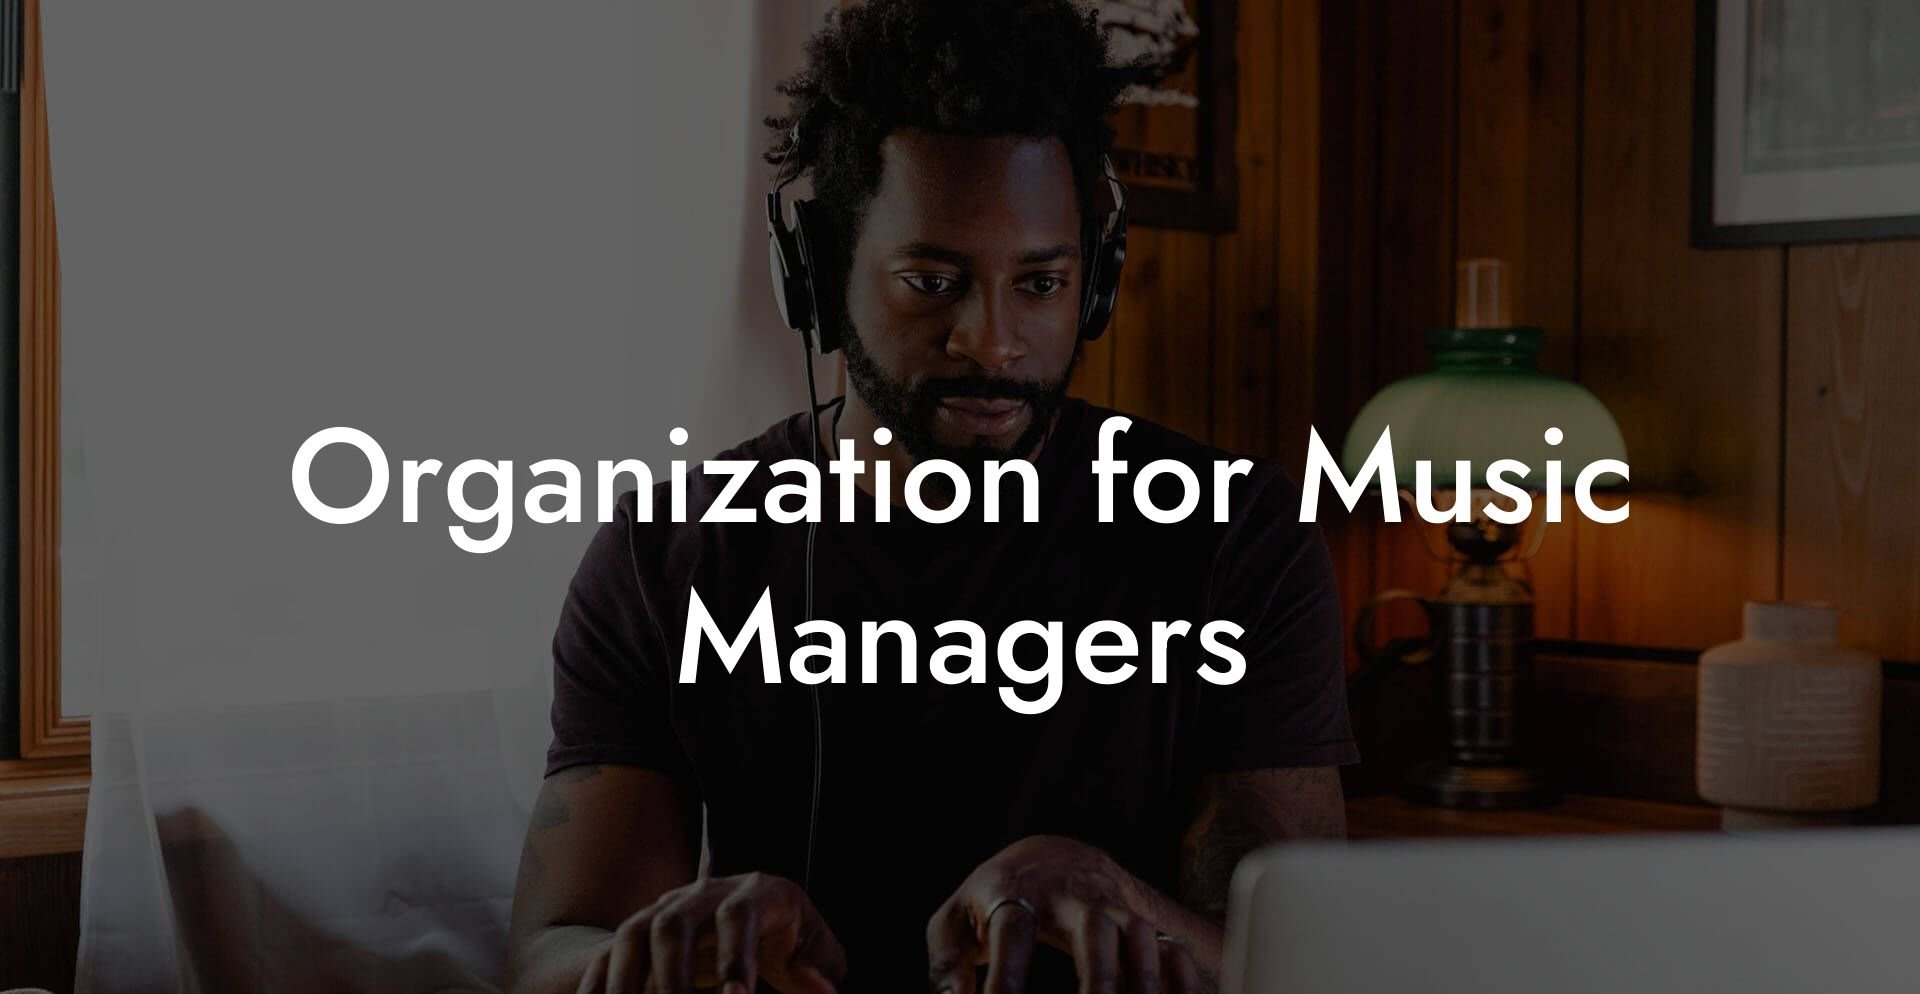 Organization for Music Managers